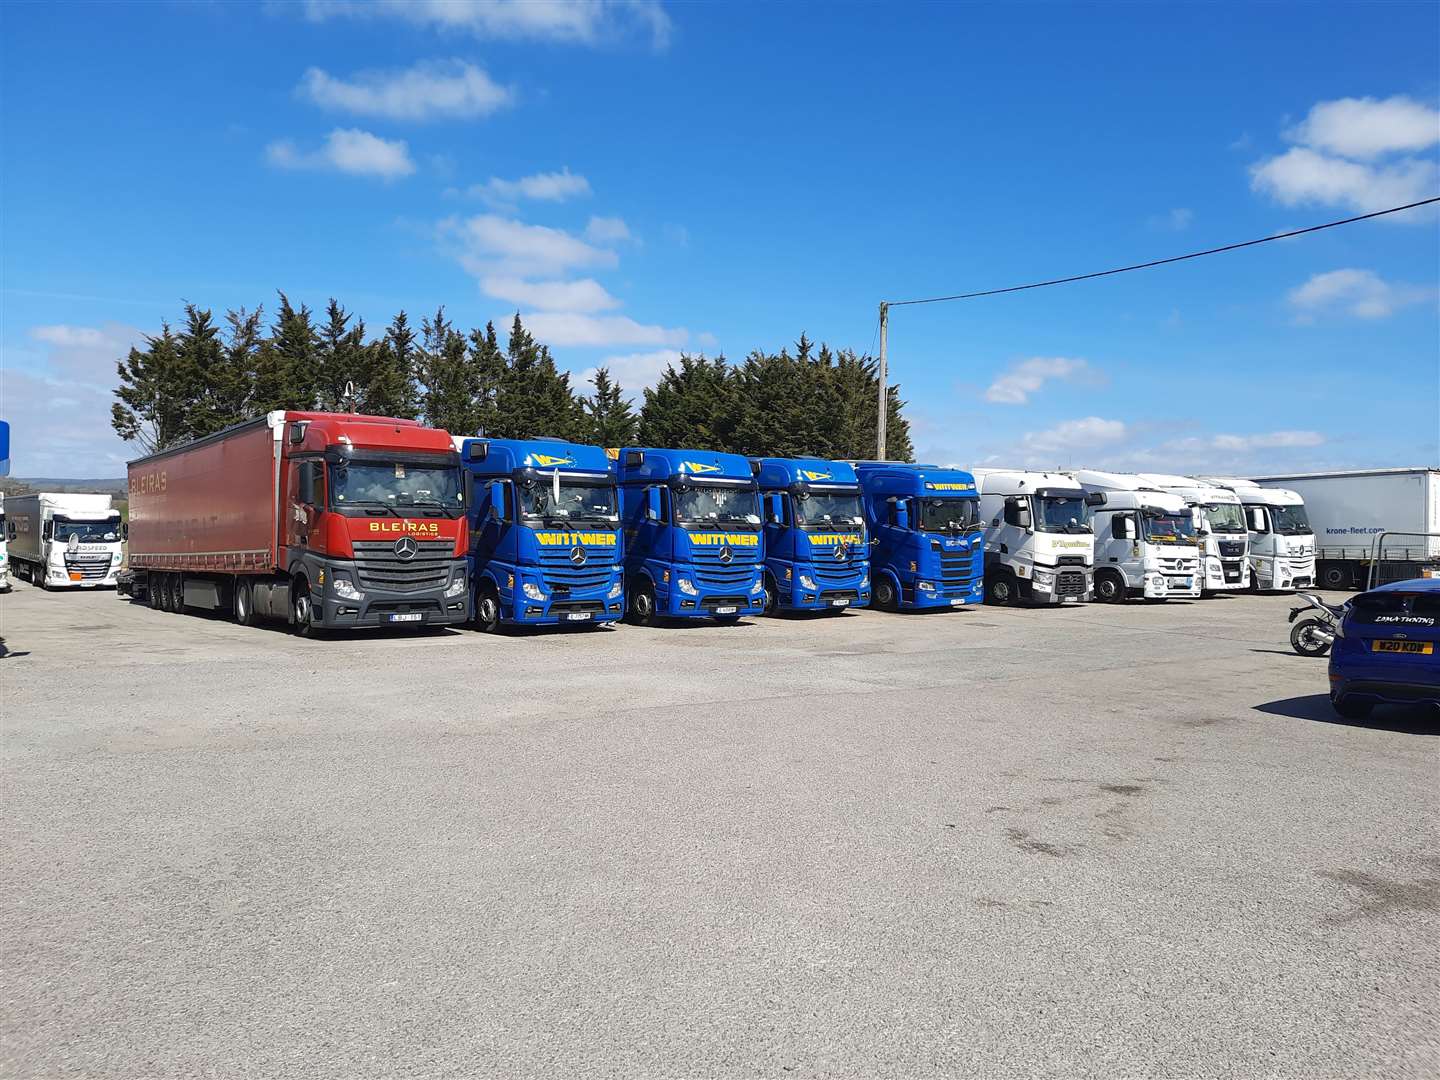 The rows of lorries outside the Airport Cafe in Ashford (56227281)